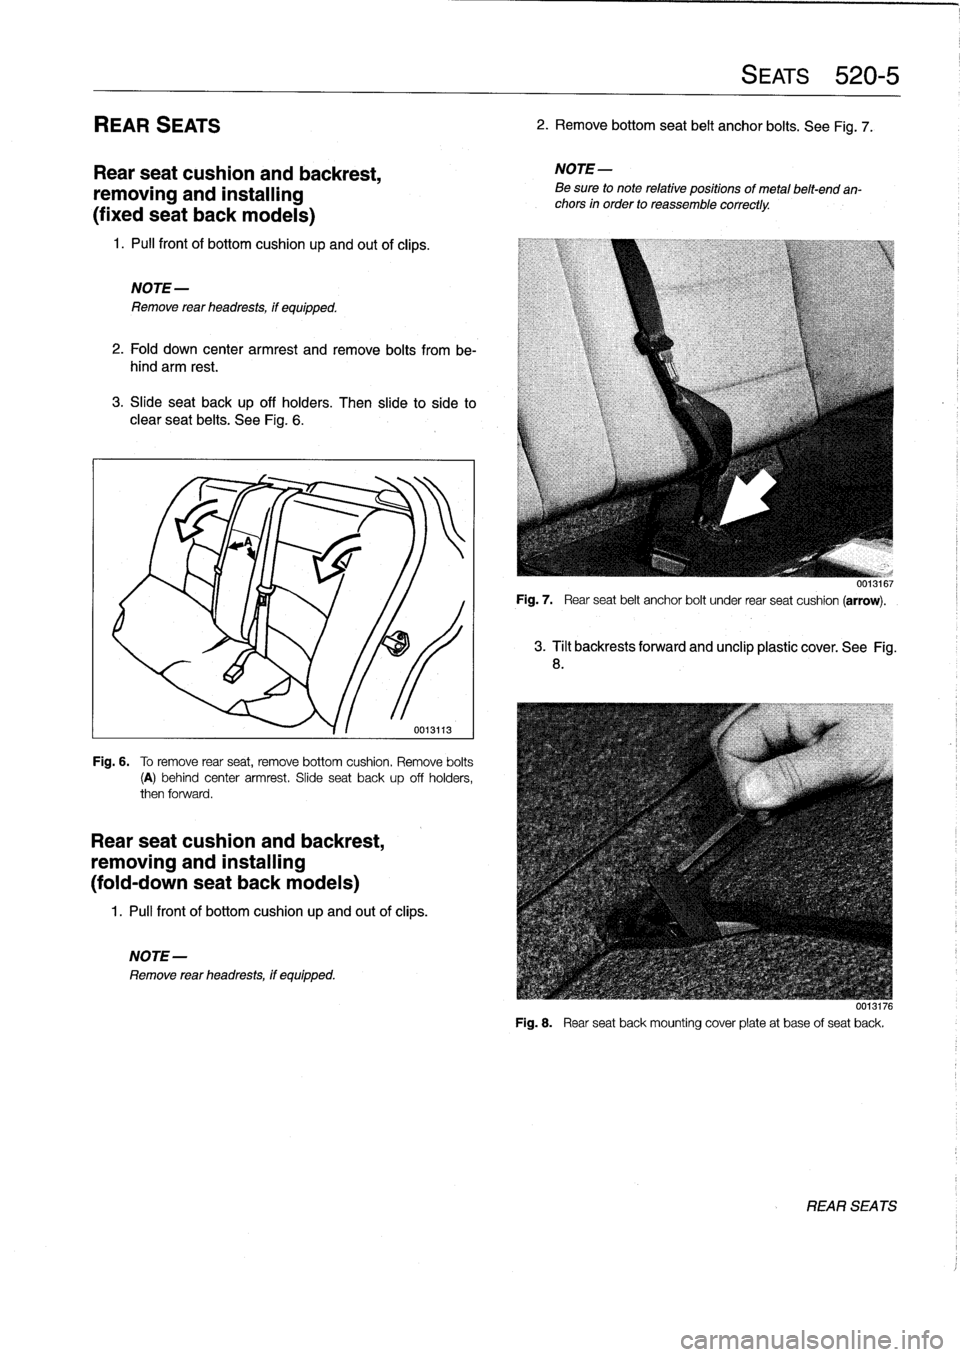 BMW 323i 1993 E36 Workshop Manual 
REAR
SEATS

Rear
seat
cushion
and
backrest,

removing
and
installing

(fixed
seat
back
modeis)

1
.
Pull
front
of
bottomcushion
up
and
out
of
clips
.

NOTE-

Remove
rear
headrests,
if
equipped
.

2
.